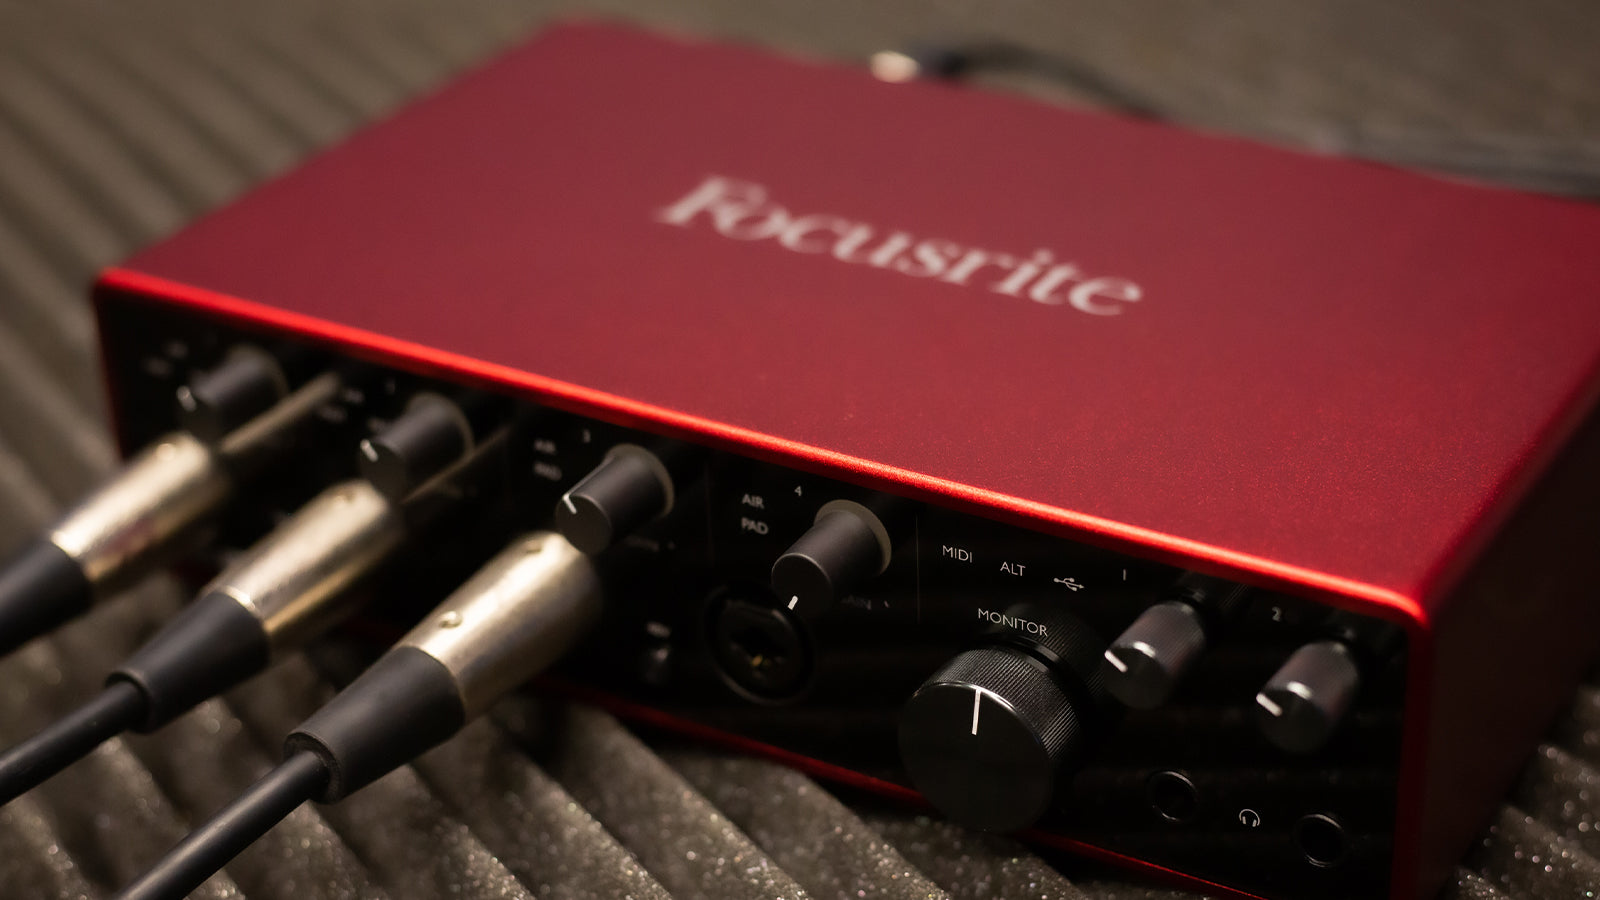 A Focusrite interface resting on some acoustic foam